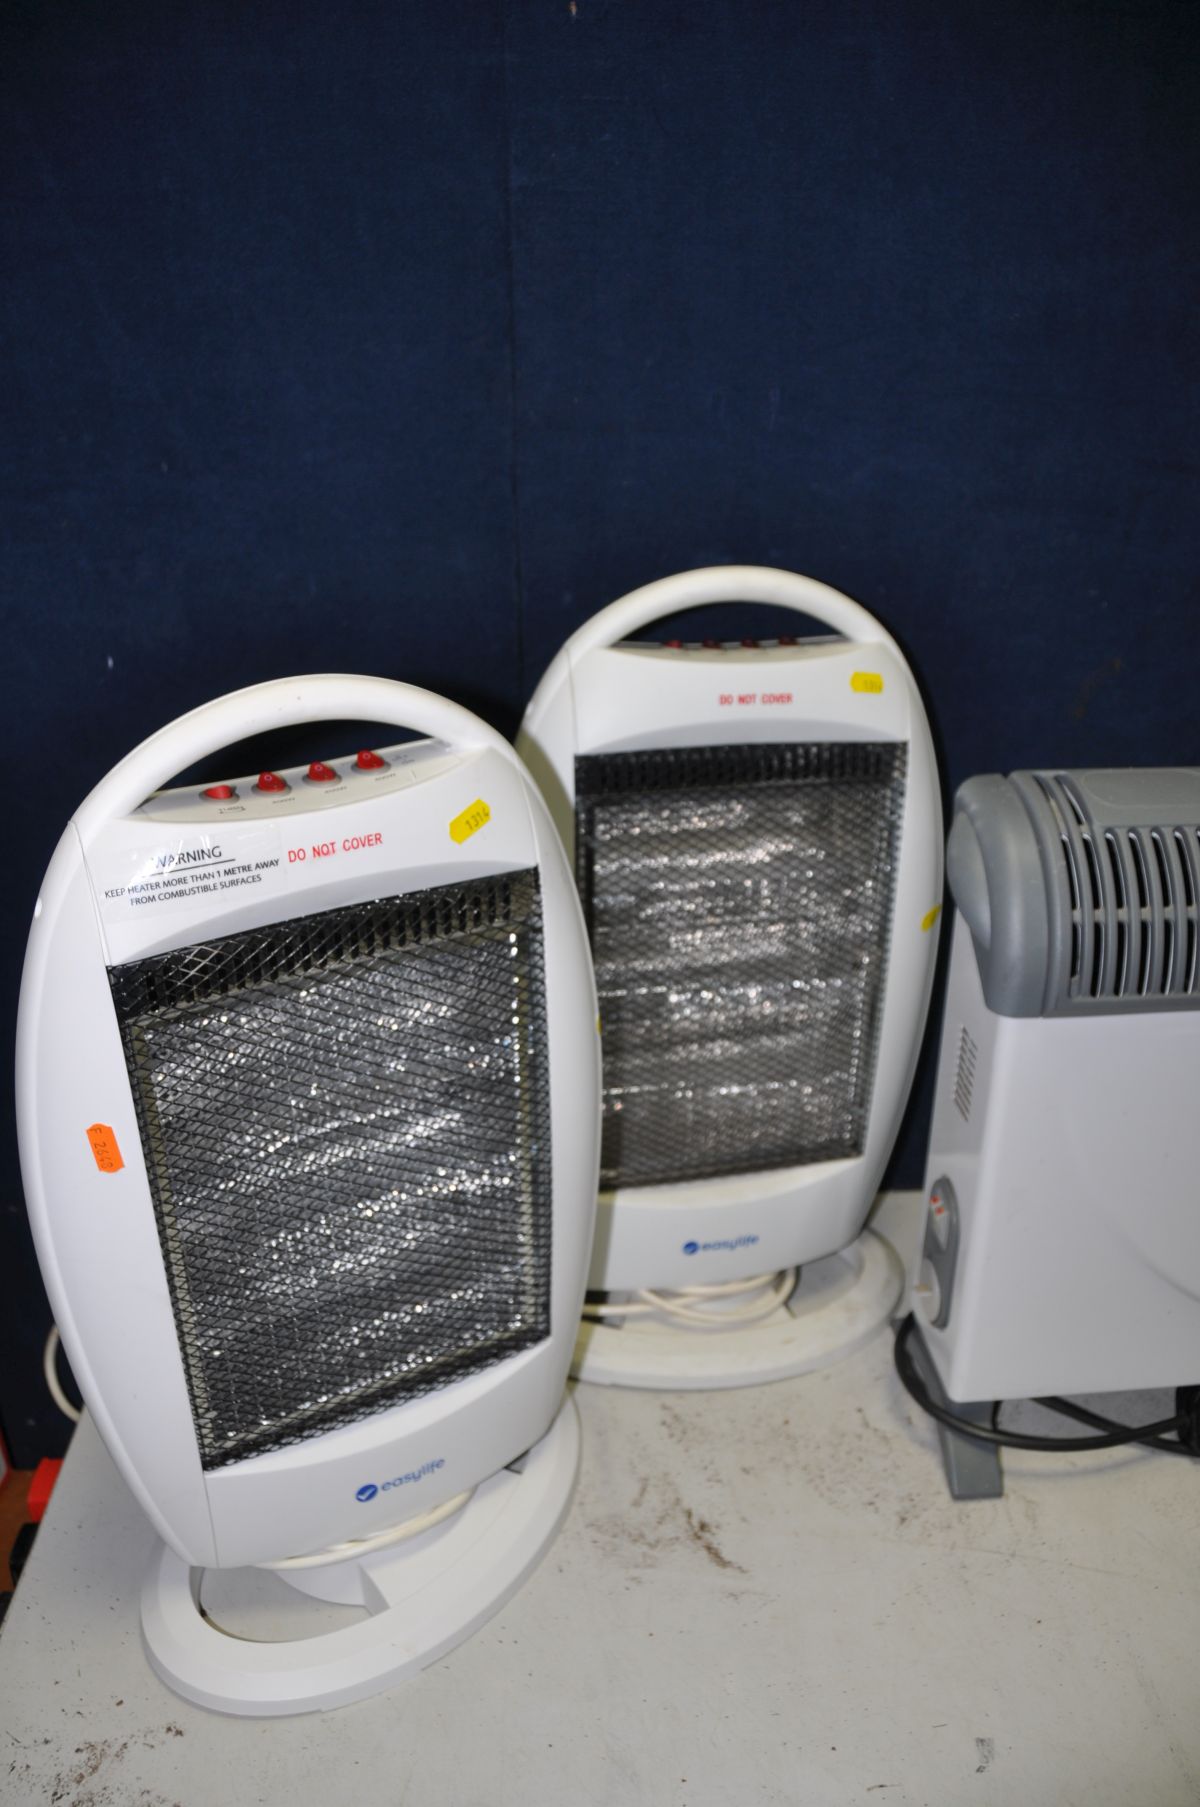 A SELECTION OF HEATERS comprising of three Easylife halogen heaters, two Hotwave blow heaters and - Image 2 of 4